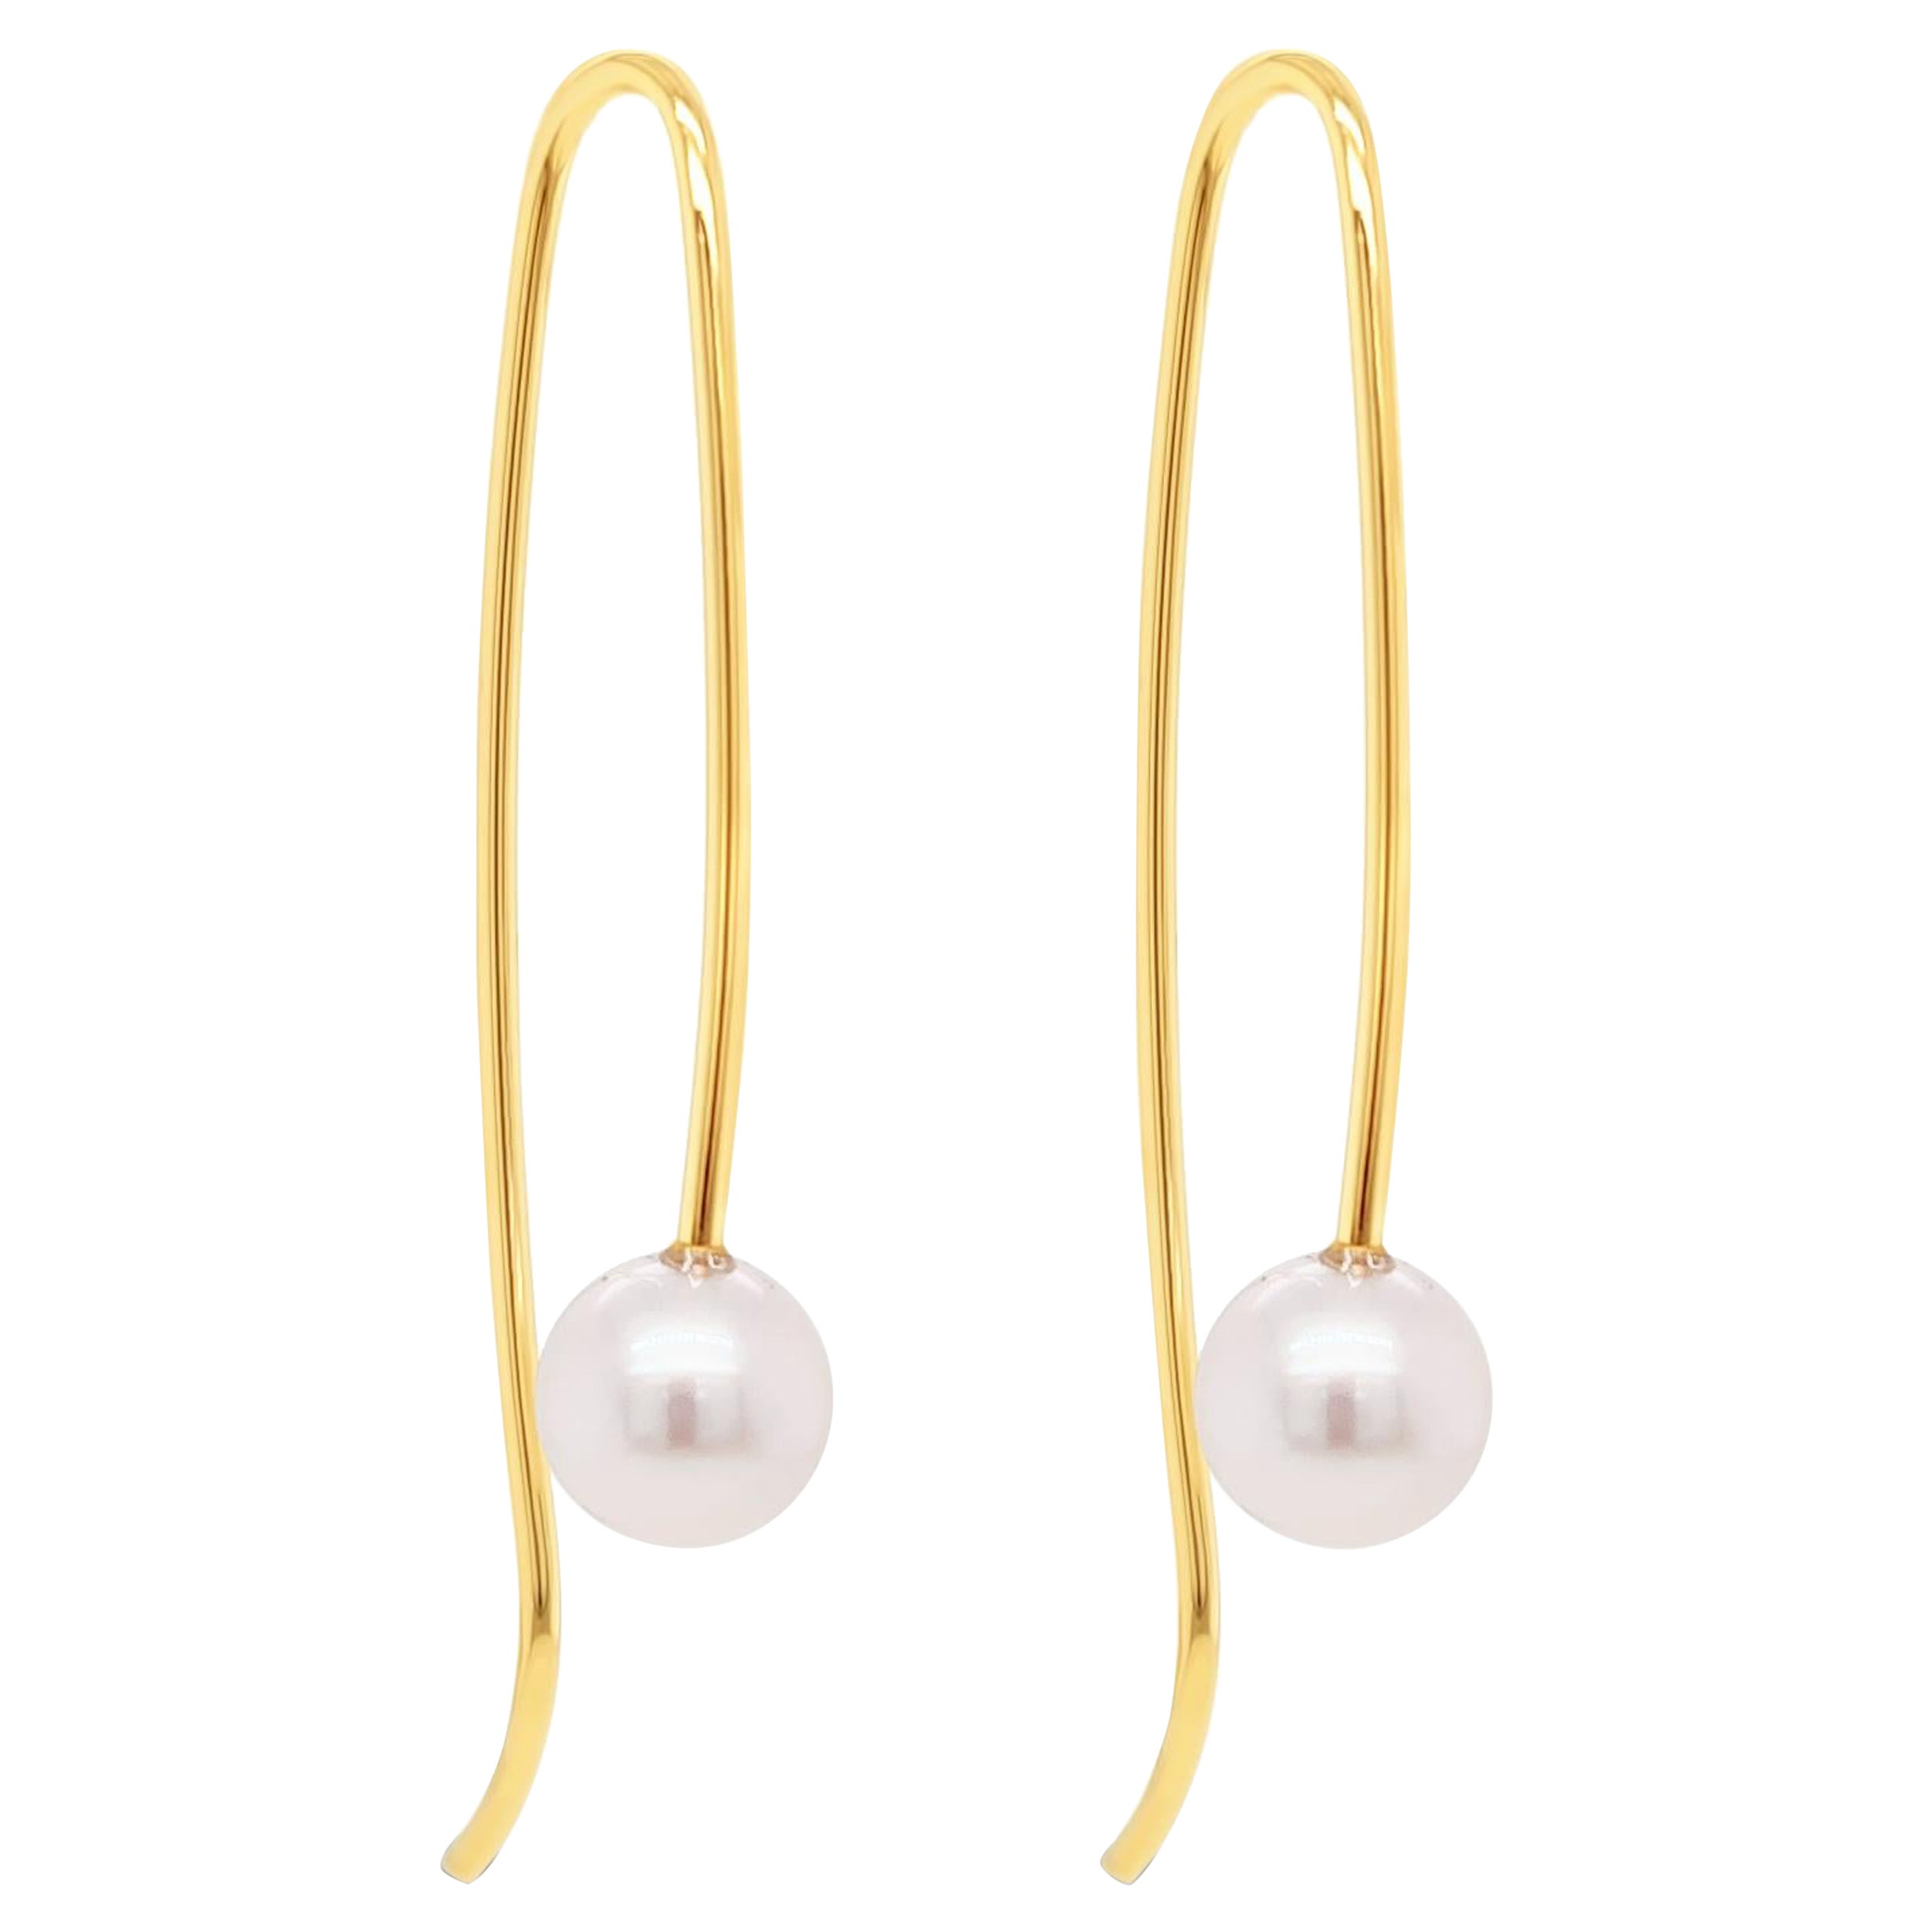 18ct Yellow Gold and Pearl Earrings "Celine"